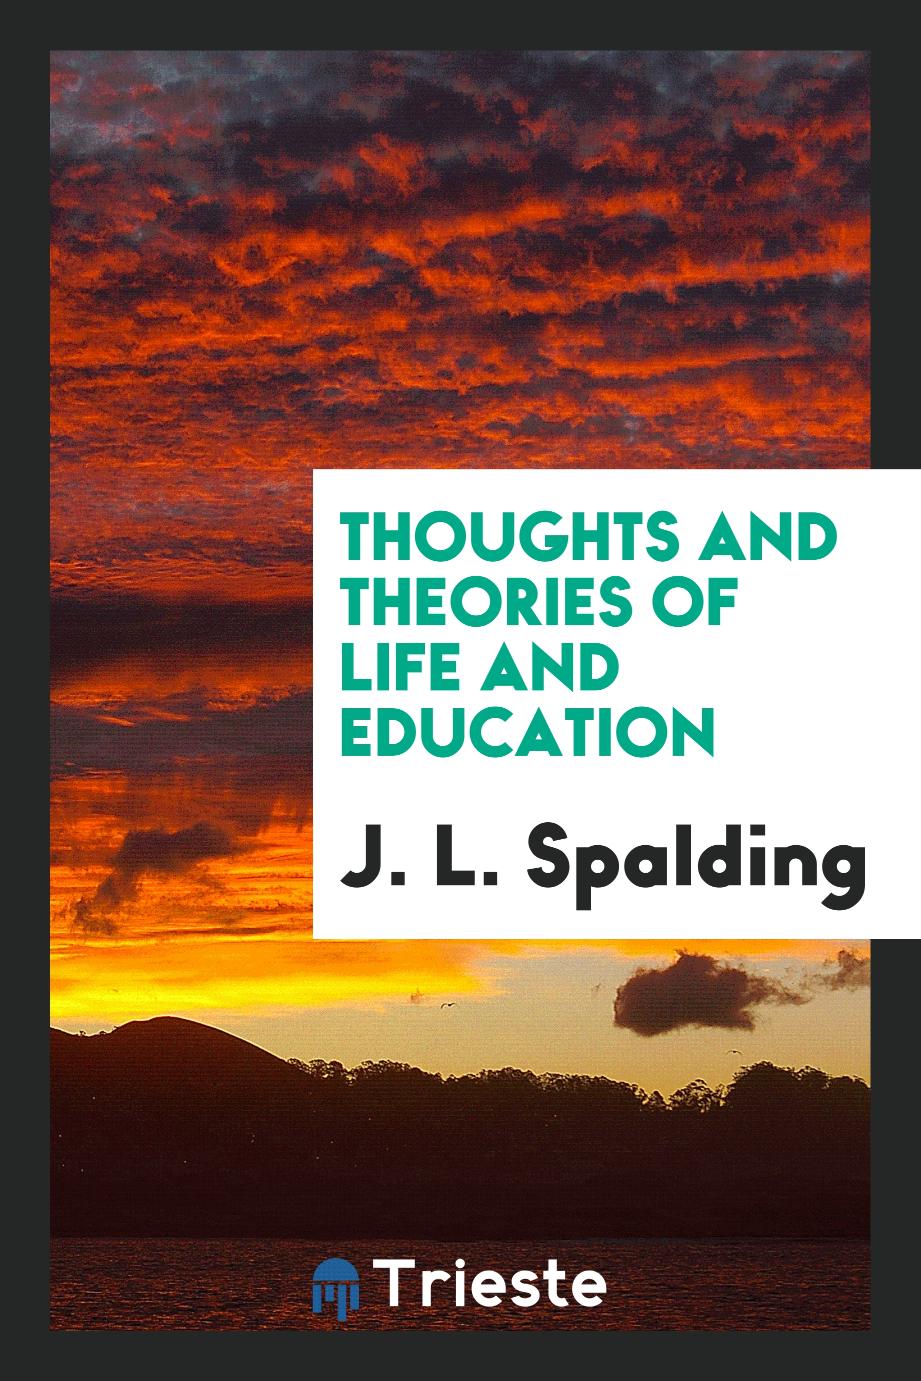 Thoughts and theories of life and education